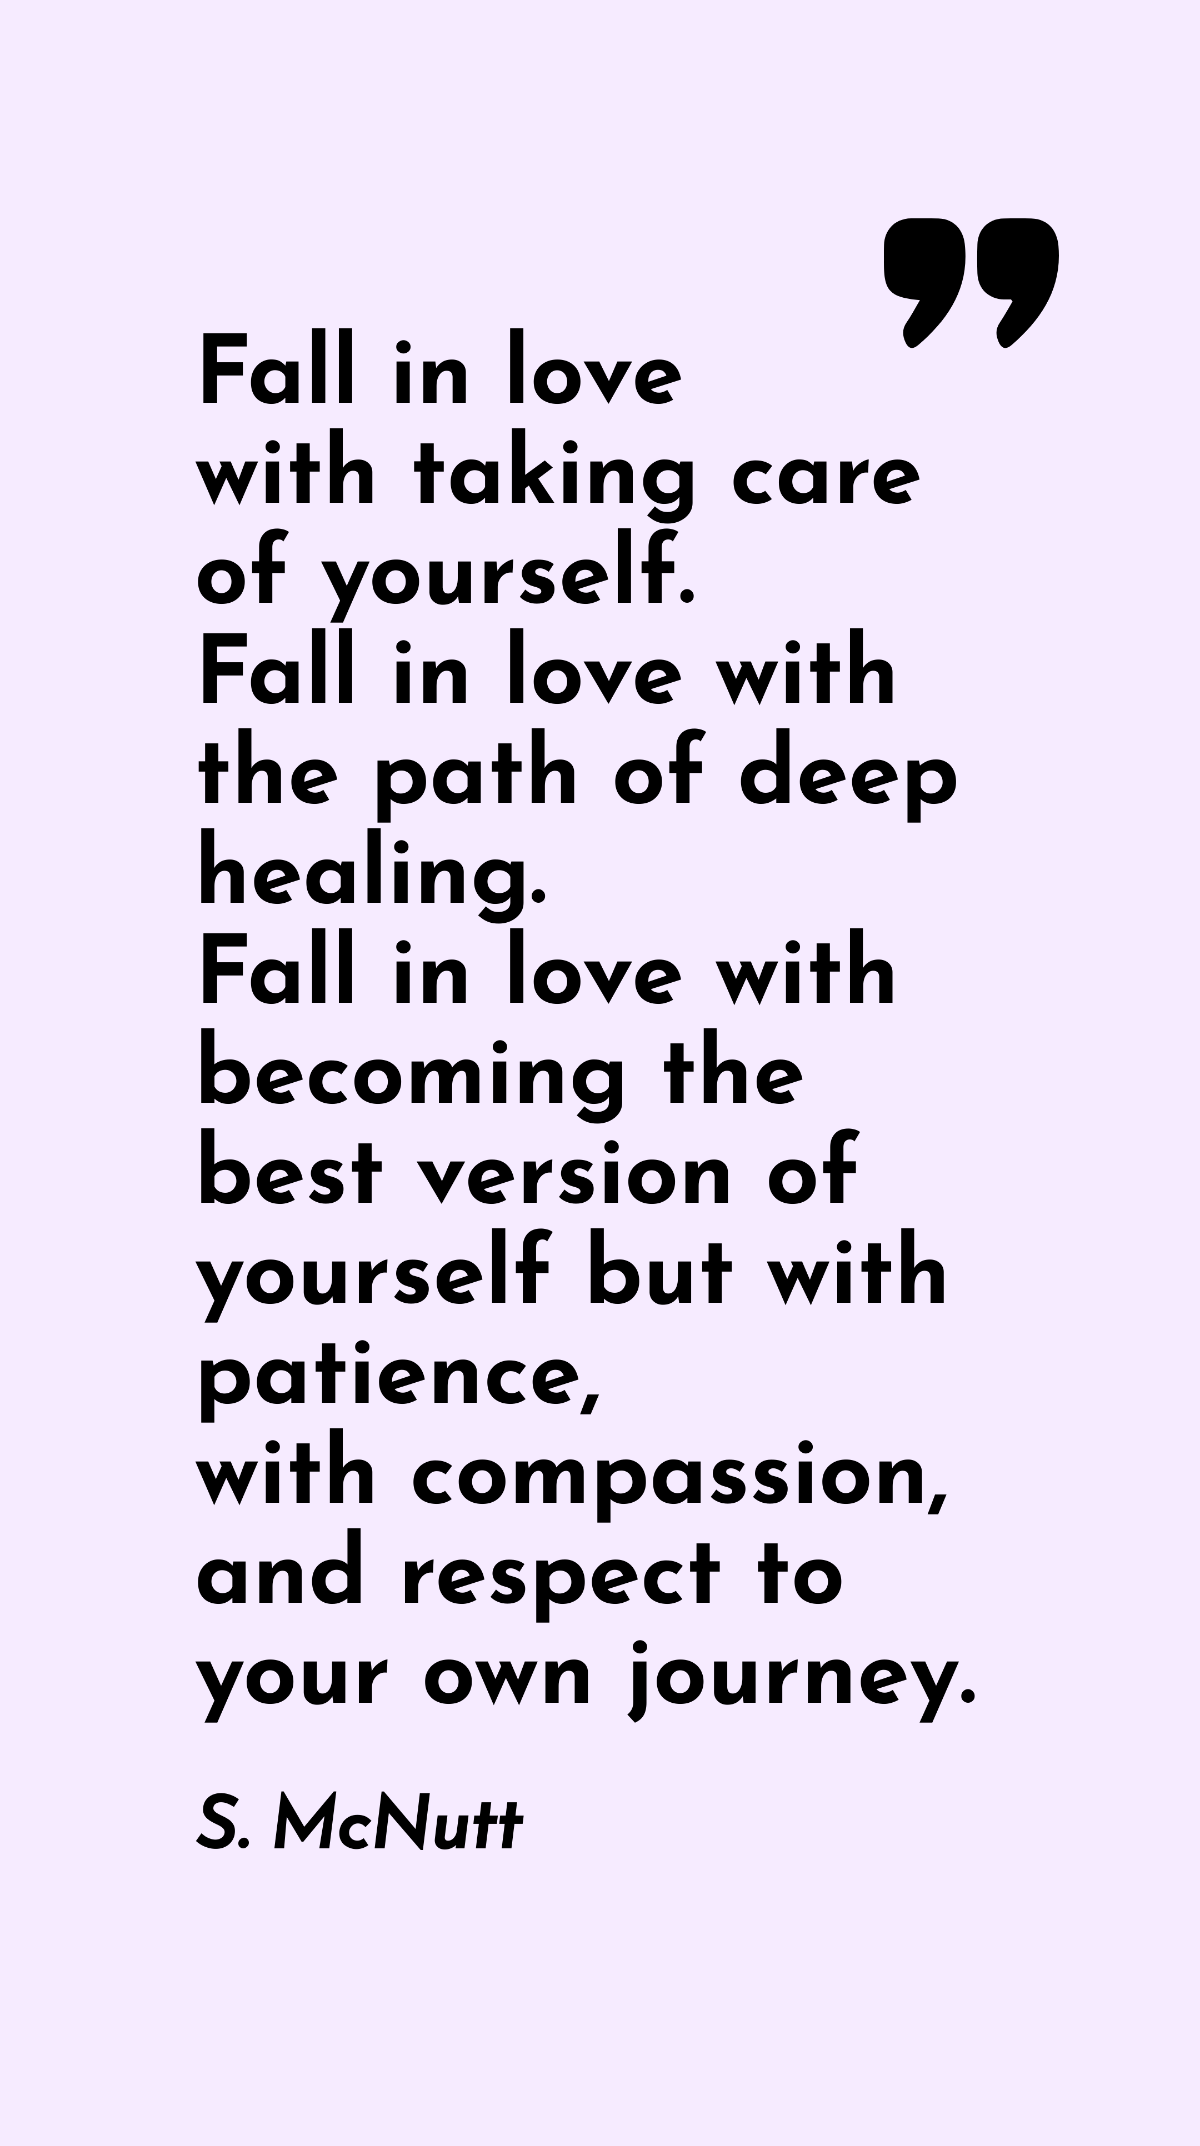 Free S. McNutt - Fall in love with taking care of yourself. Fall in love with the path of deep healing. Fall in love with becoming the best version of yourself but with patience, with compassion, and respe